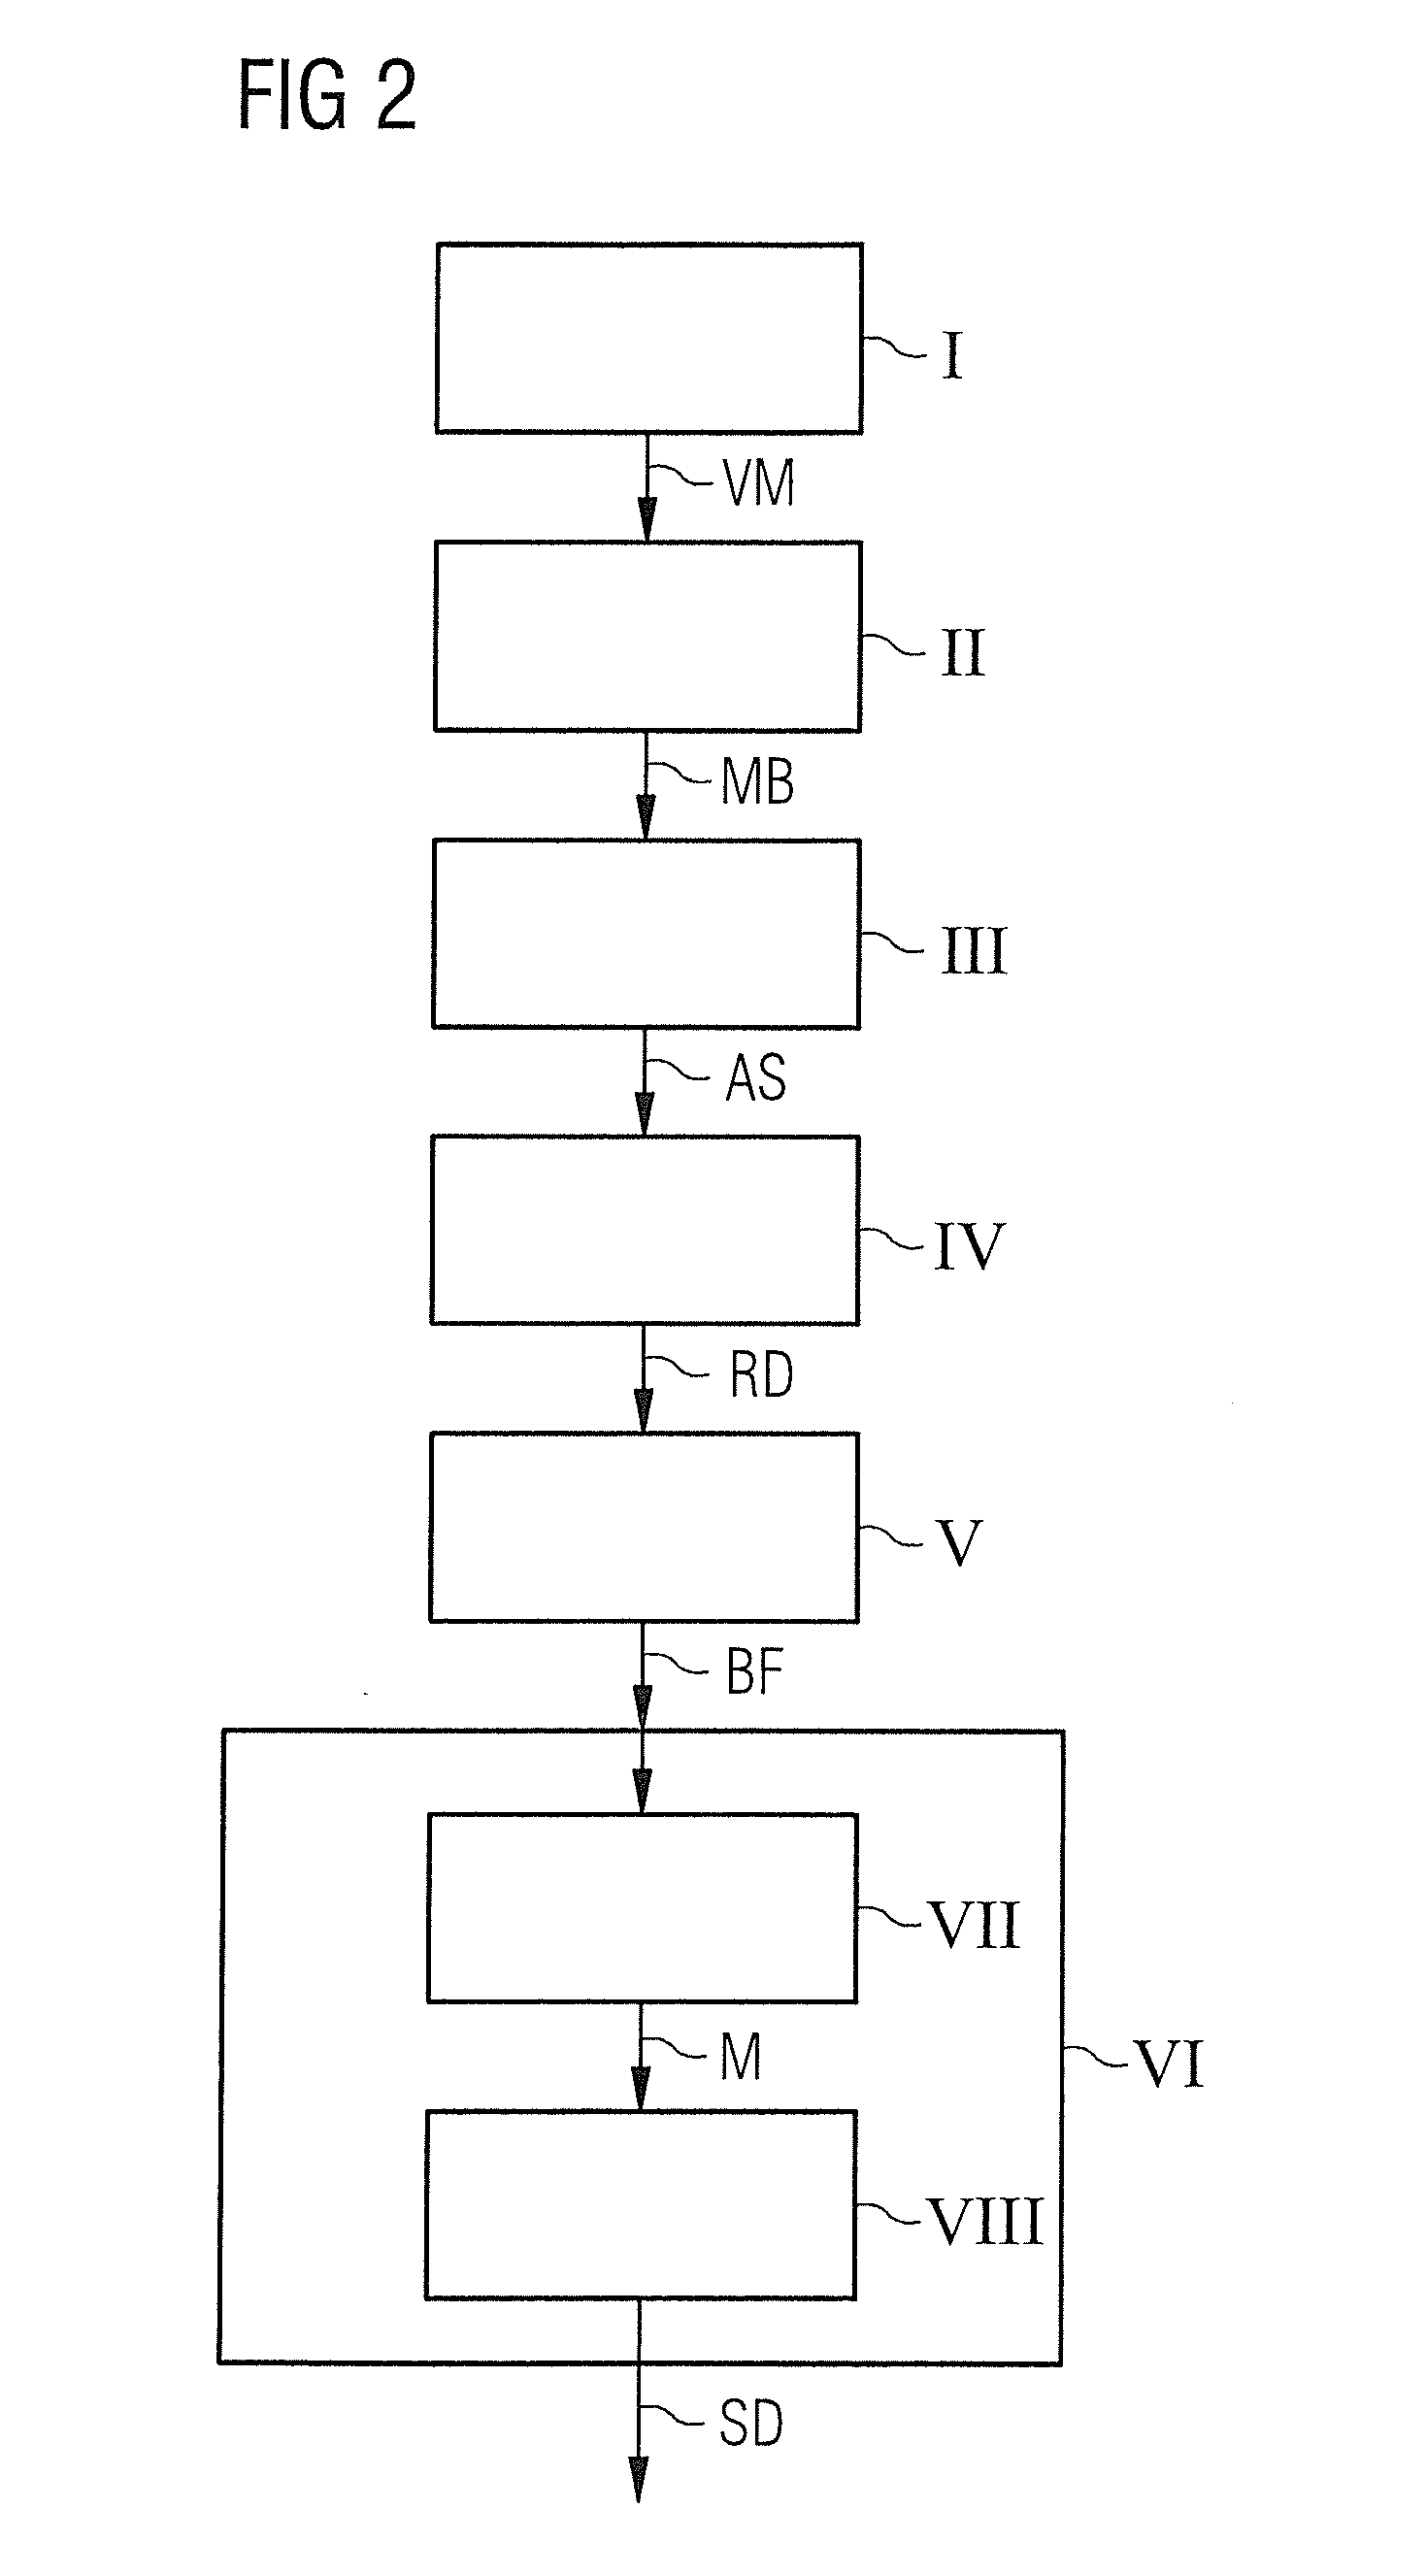 Method for determining a magnetic resonance control sequence, and magnetic resonance system operable according to the control sequence